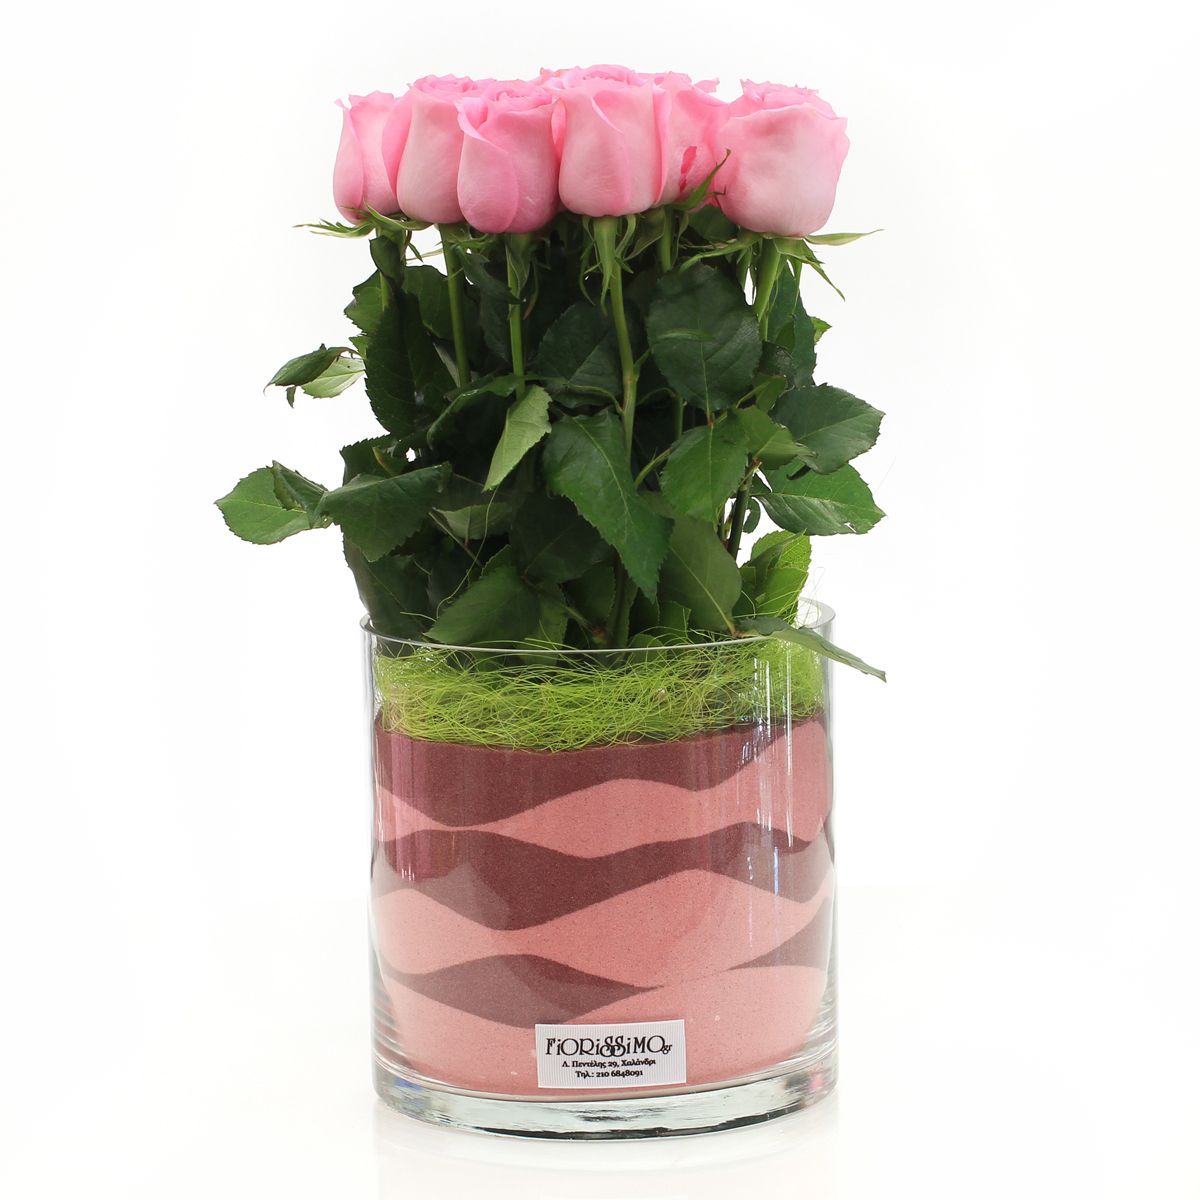 Harmony with roses in a glass